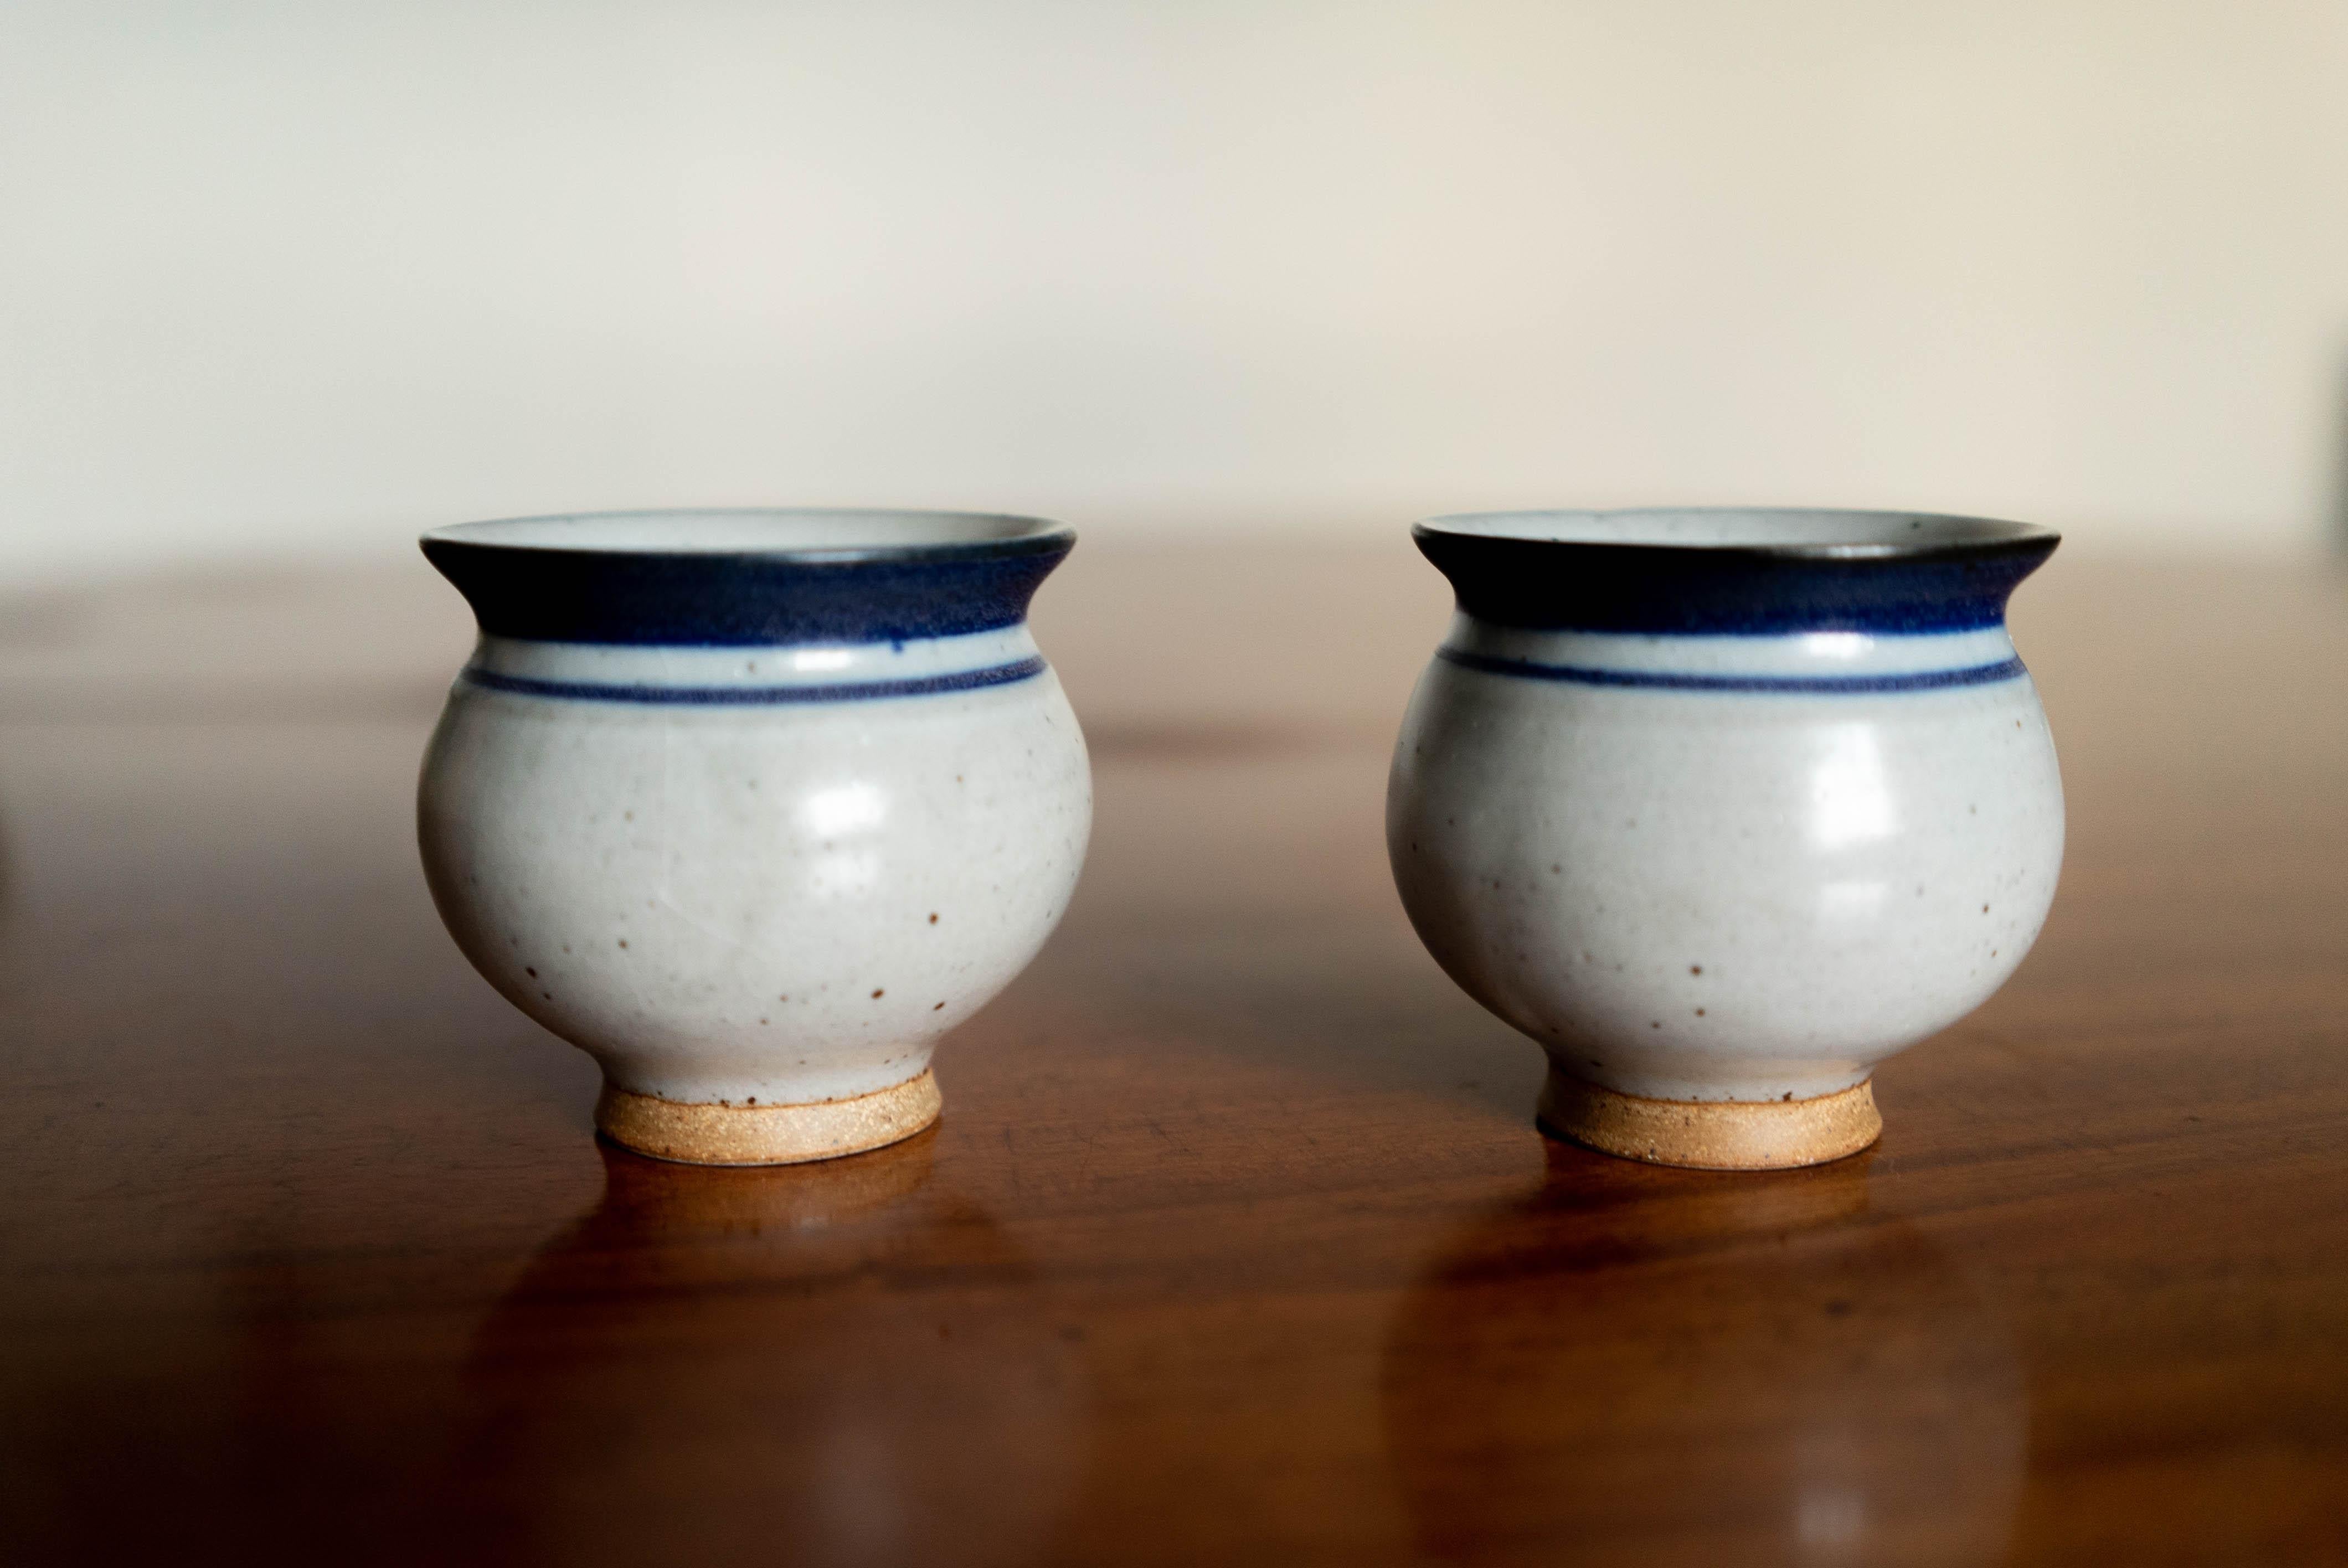 Jacob Bang, Danish 1932-2011
cups in stonewear with grey, blue glaze. H: 7.5 cm.
Made in Jacob Bang's own studio during the 1980s
Marked on the base.
Jacob Bang was a Danish ceramicist, designer, sculptor, and the son of ceramic artist Arne Bang.